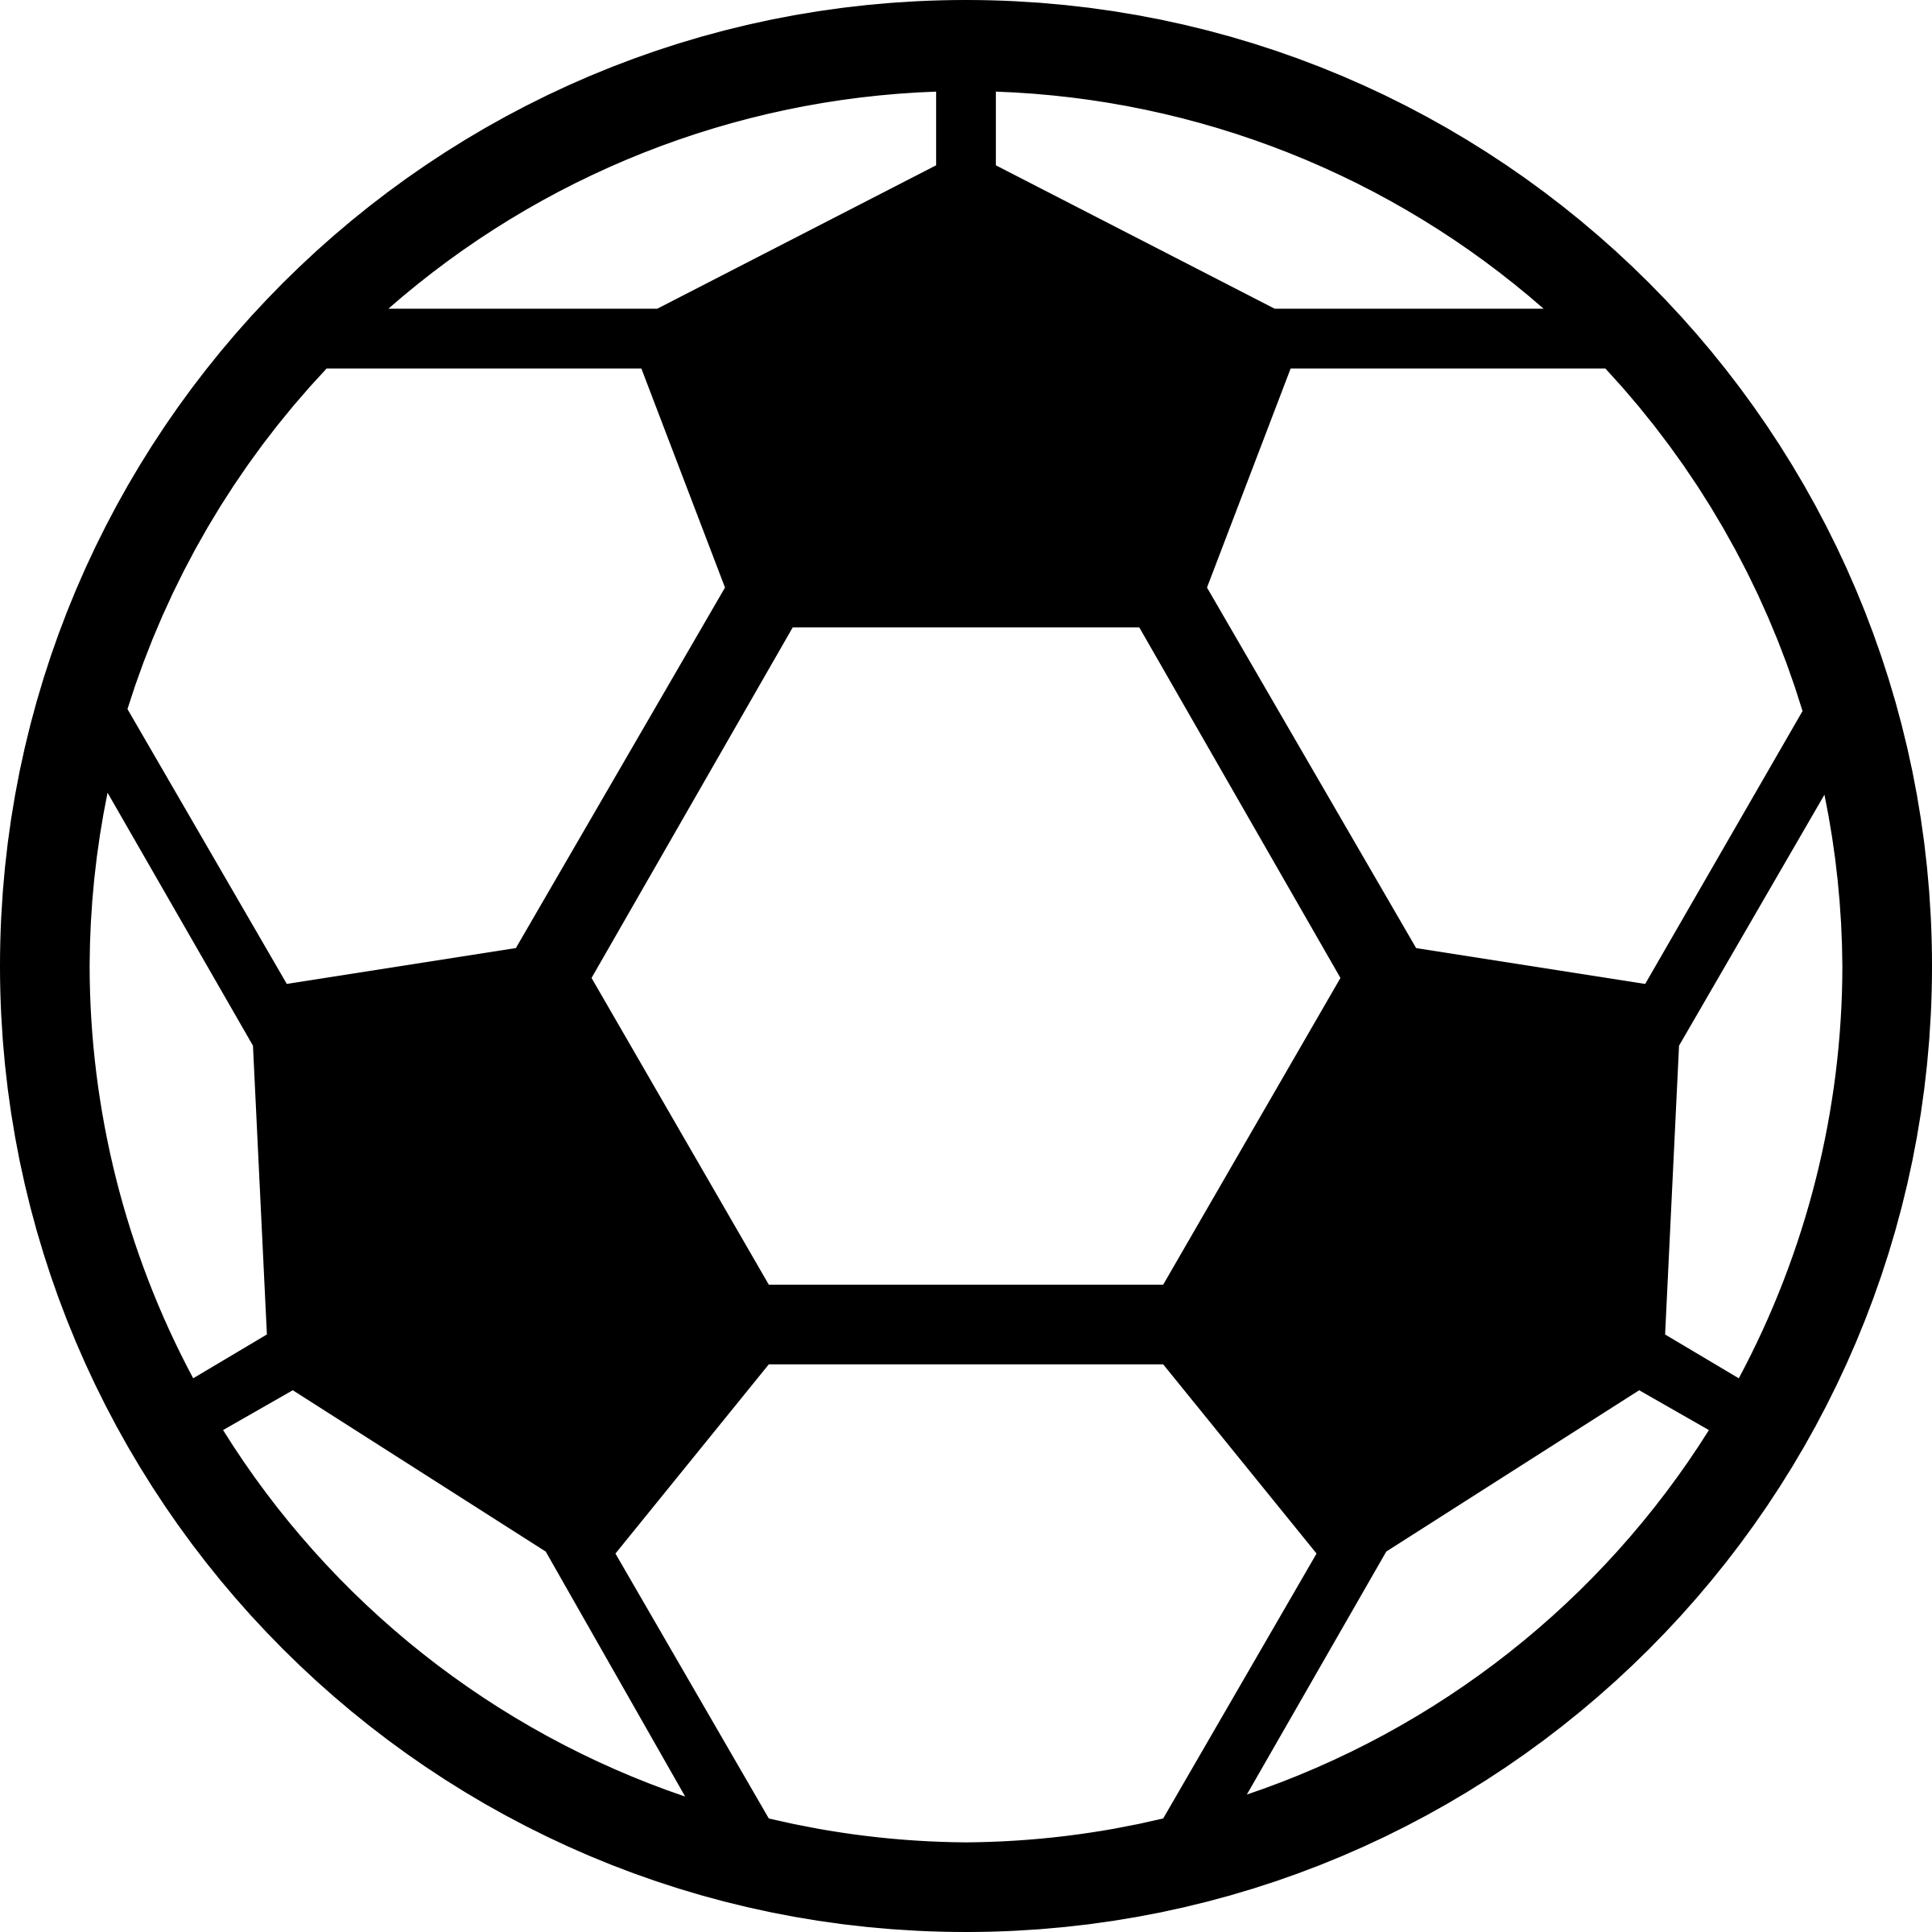 Soccer ball clip art free large images 3 clipartix 2